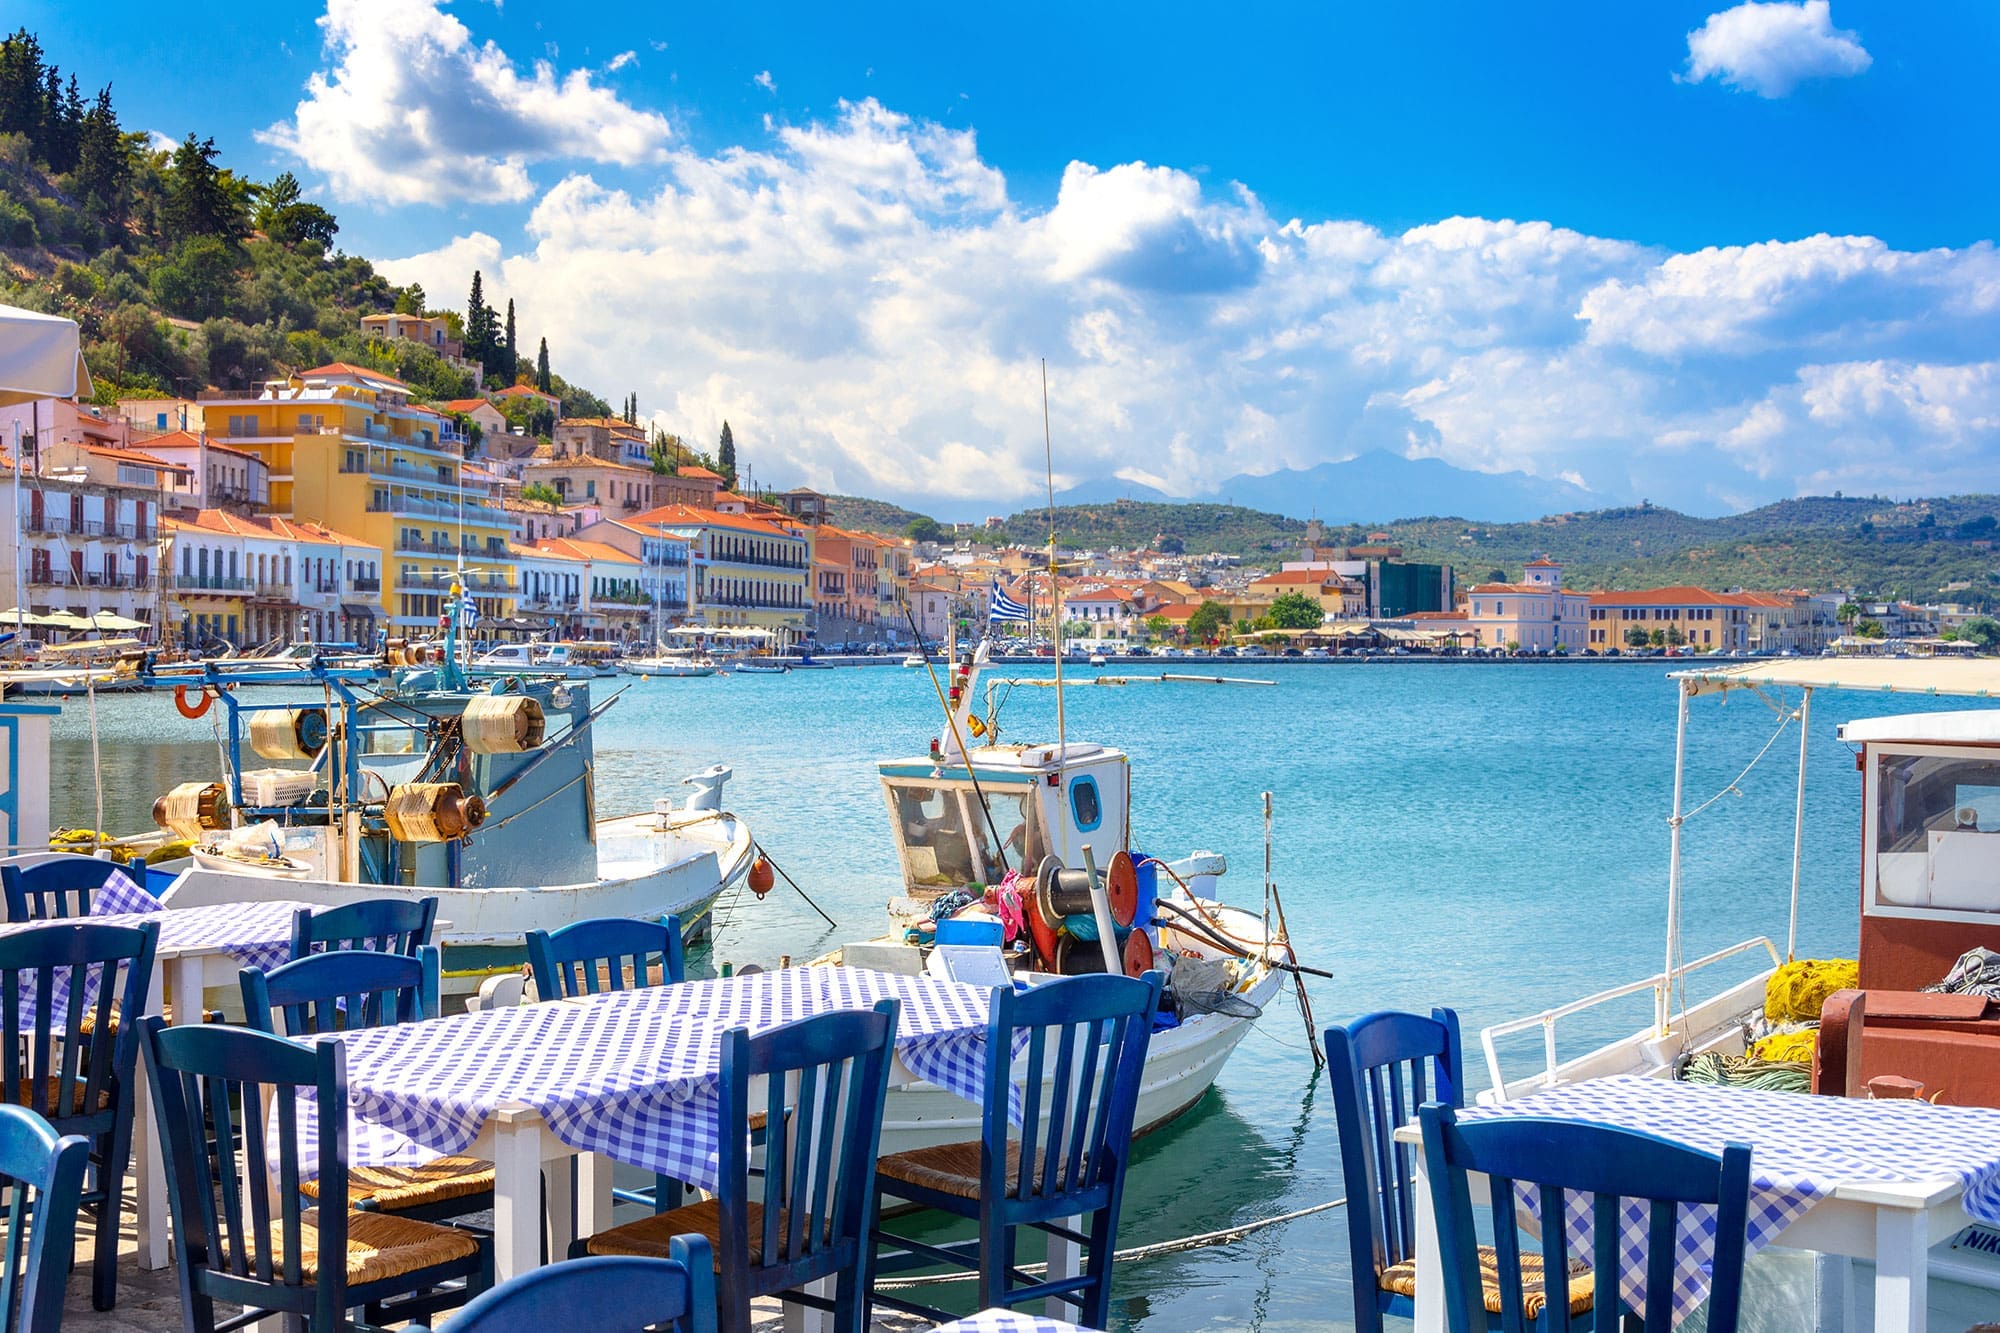 be a greek travel experiences